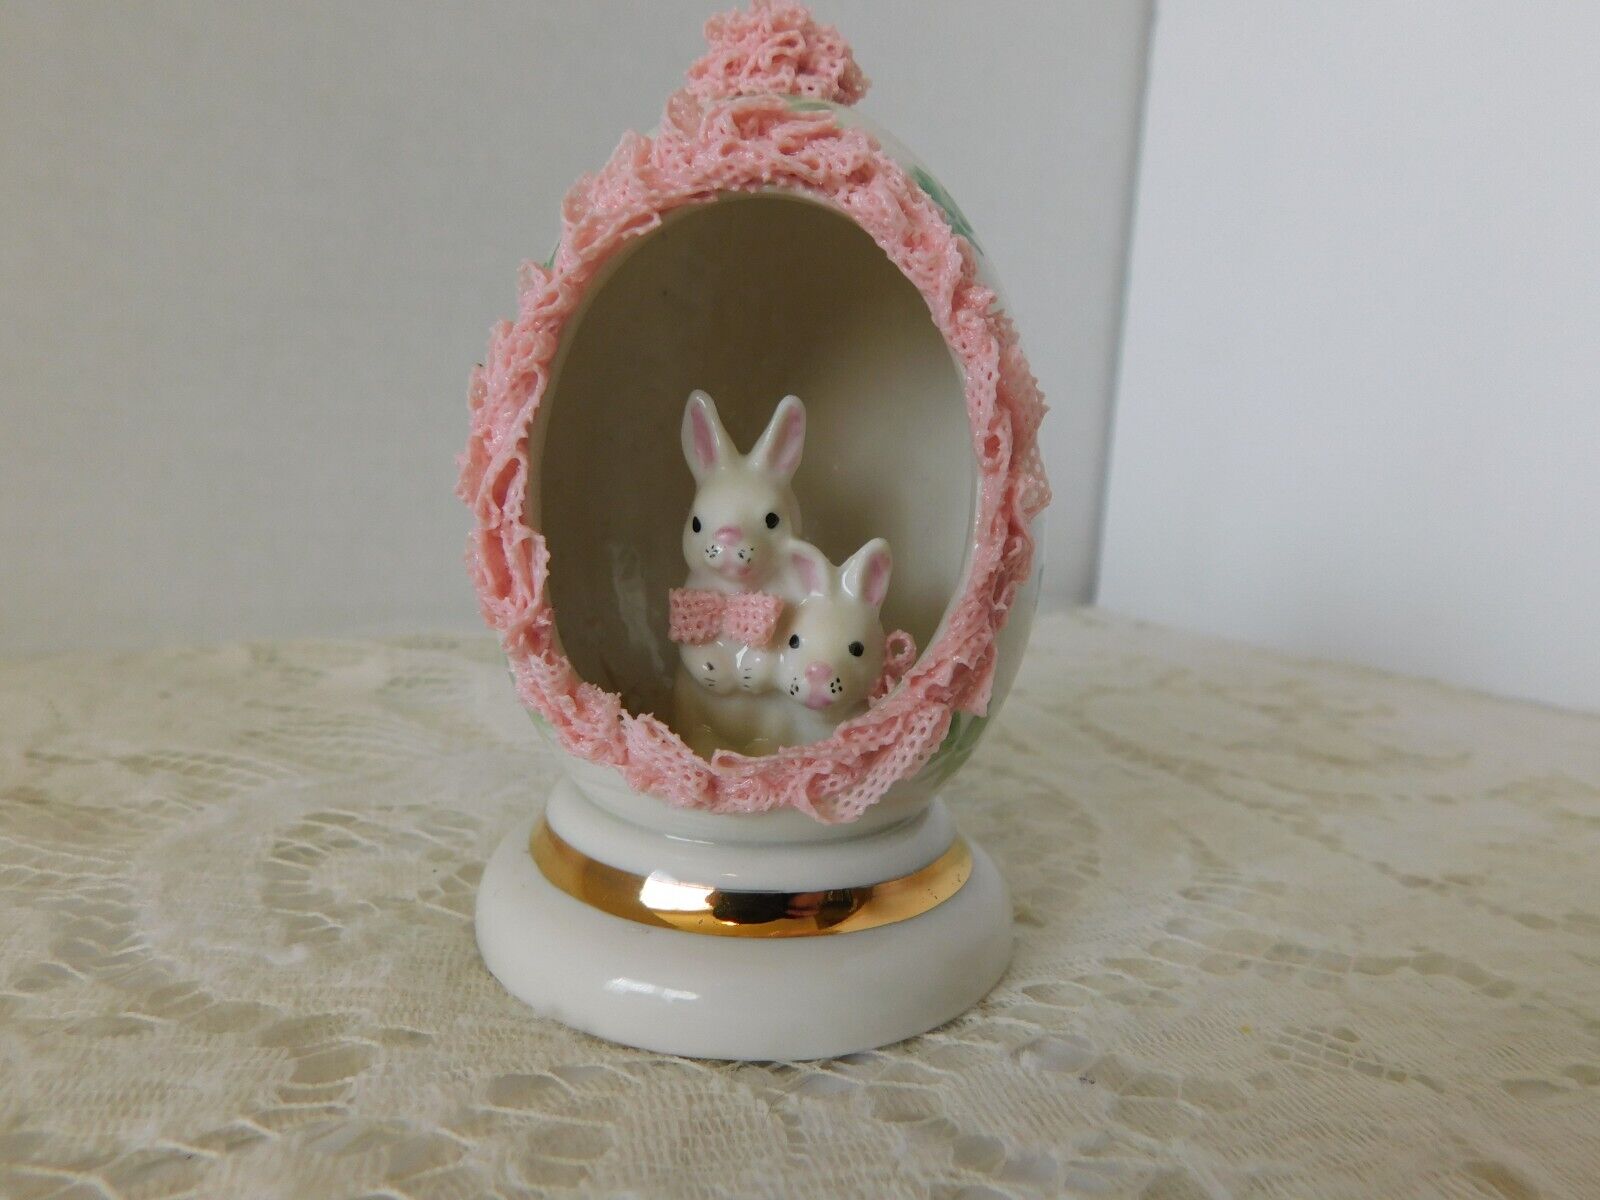 STUNNING MV DRESDEN FIGURINE PORCELAIN LACE EASTER EGG WITH TWO BUNNY RABBITS